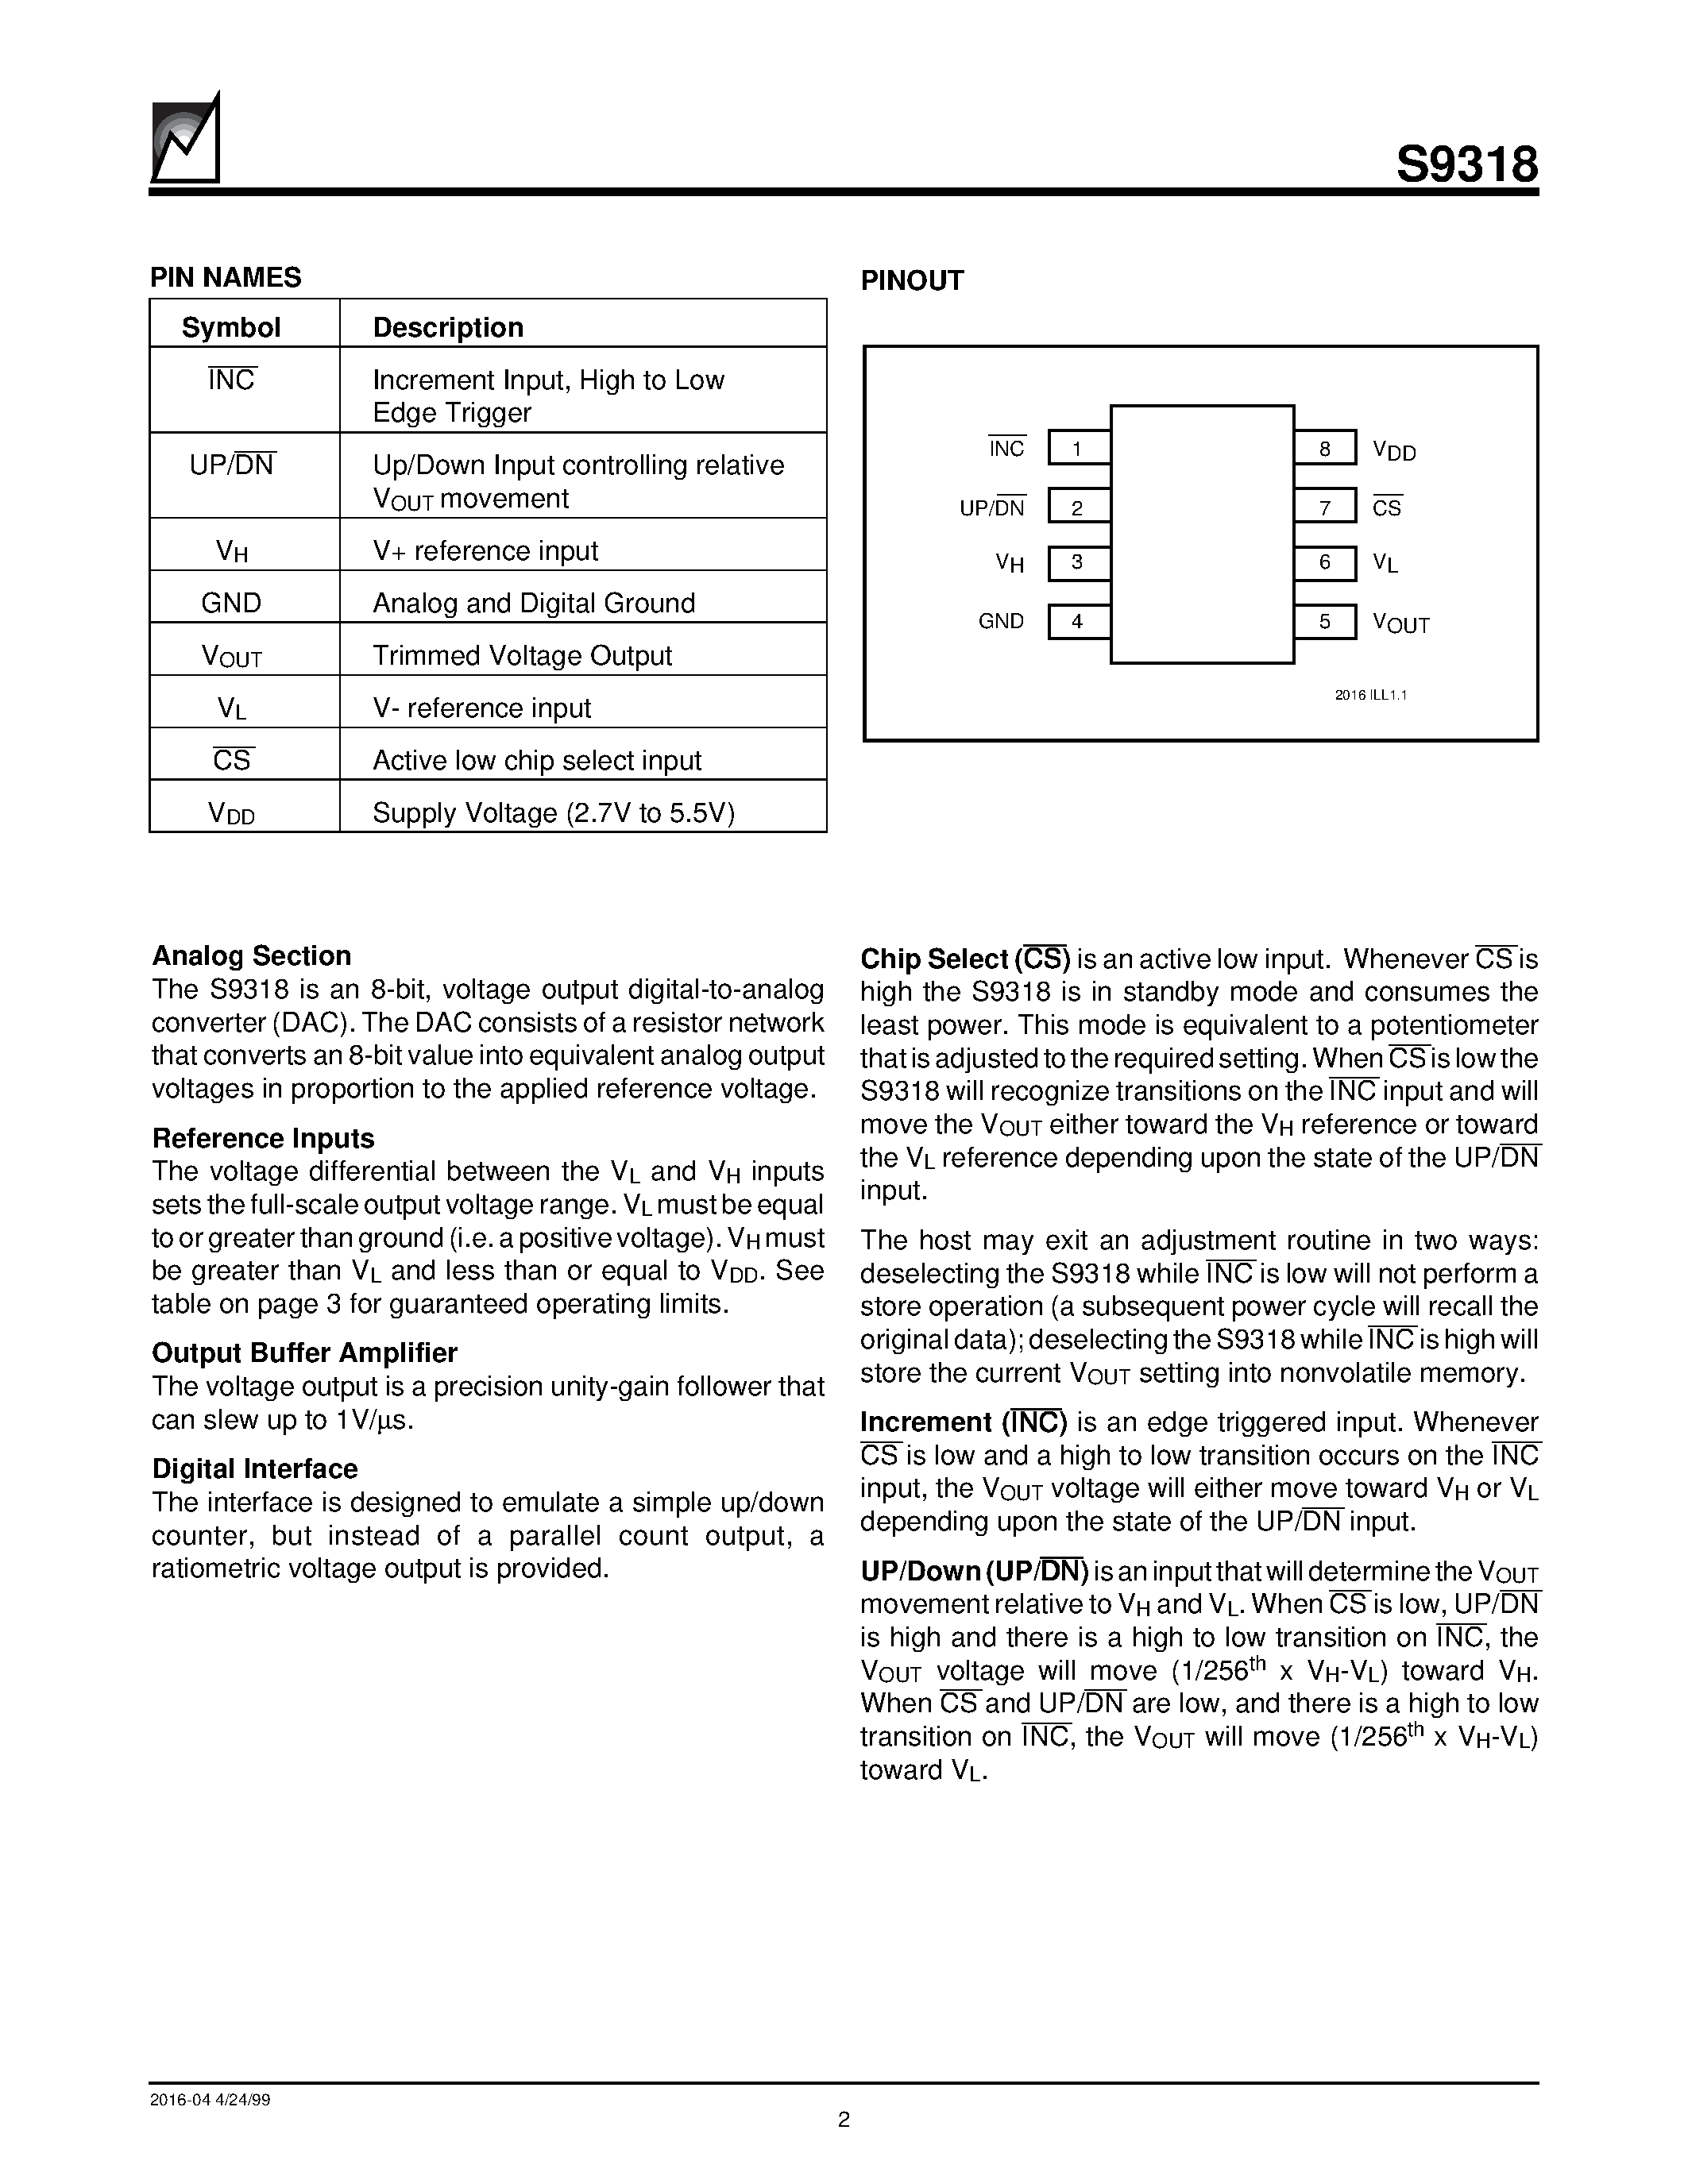 Datasheet S9318S - Nonvolatile DACPOT Electronic Potentiometer With Up/Down Counter Interface page 2